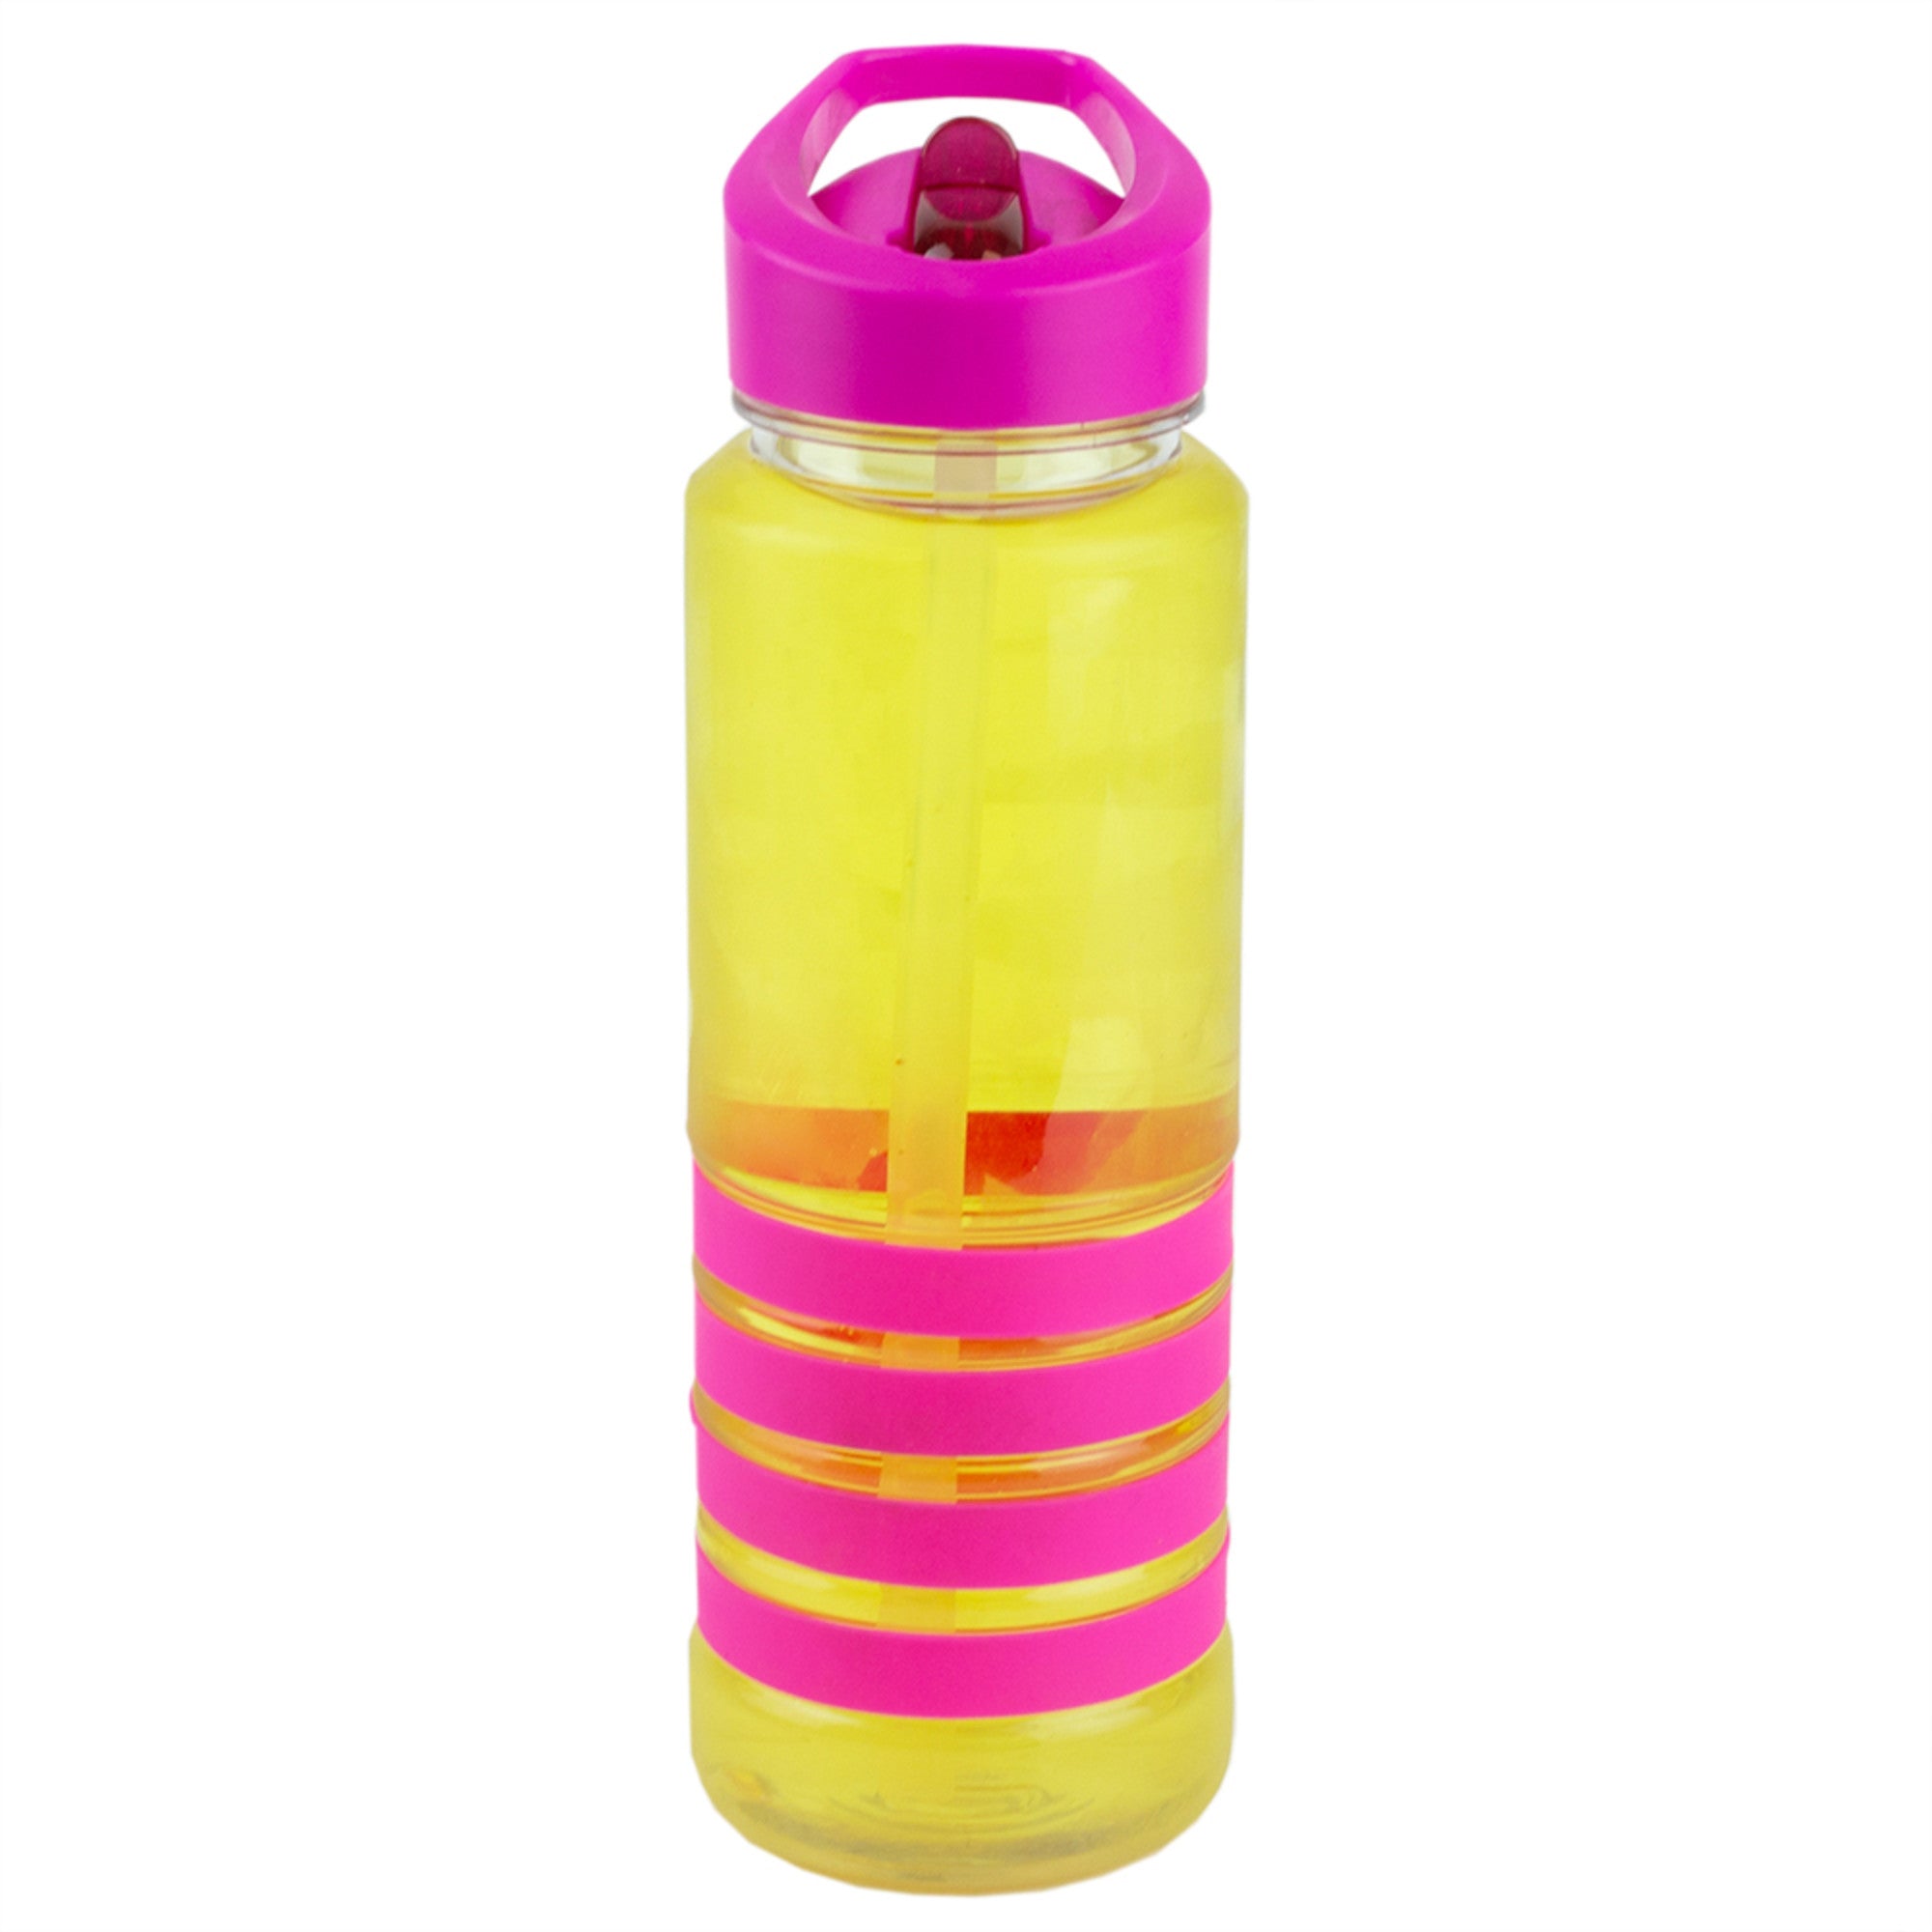 Home Basics 24 oz. Plastic Sports Bottle with Rubber Grip - Assorted Colors